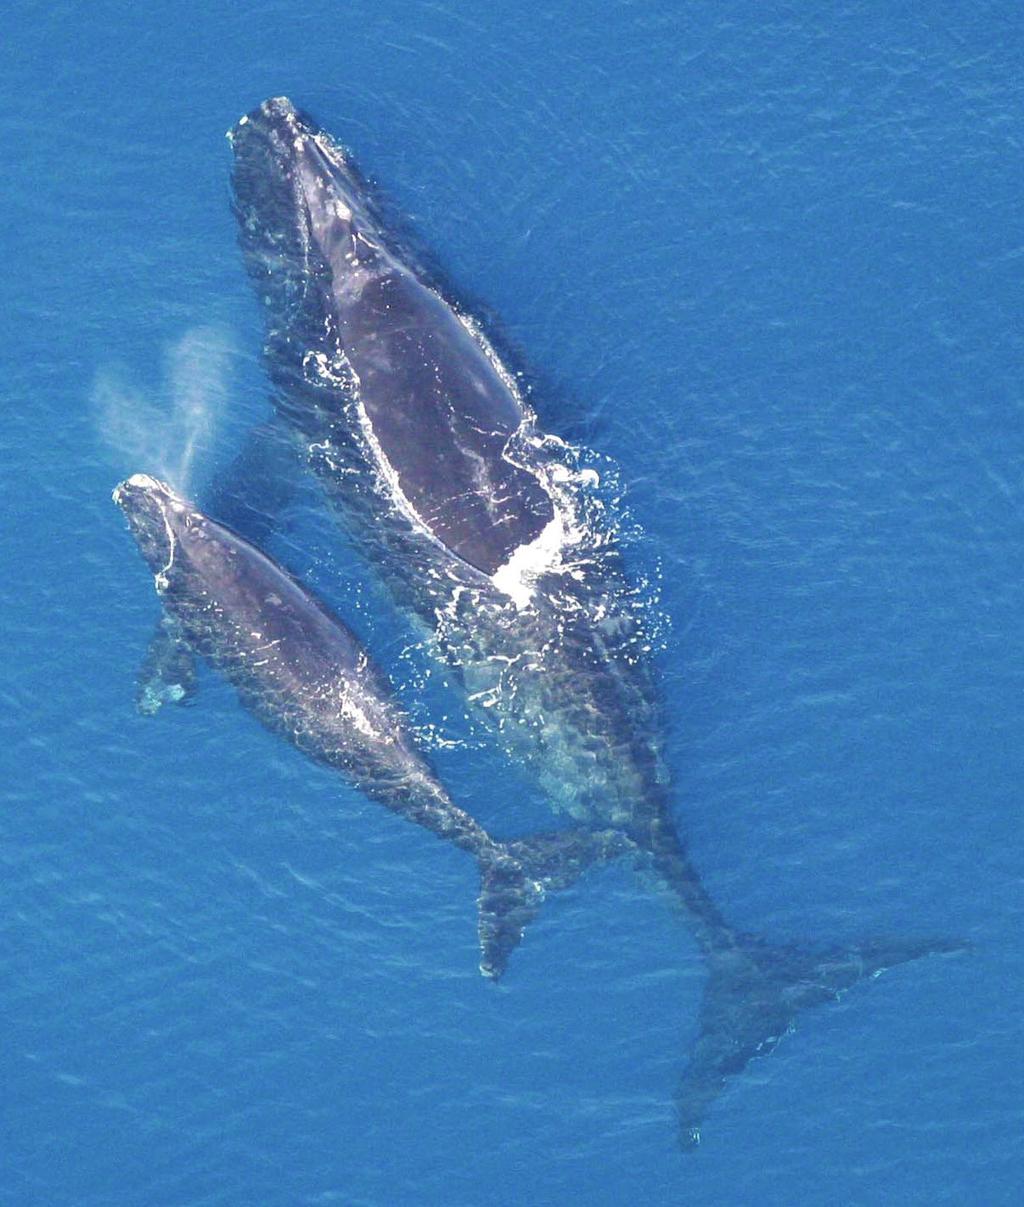 Humans killed most of them through whaling and commercial fishing in the 1700s and 1800s. Right whales are considered to be endangered and have been protected from human harm since the 1930s.